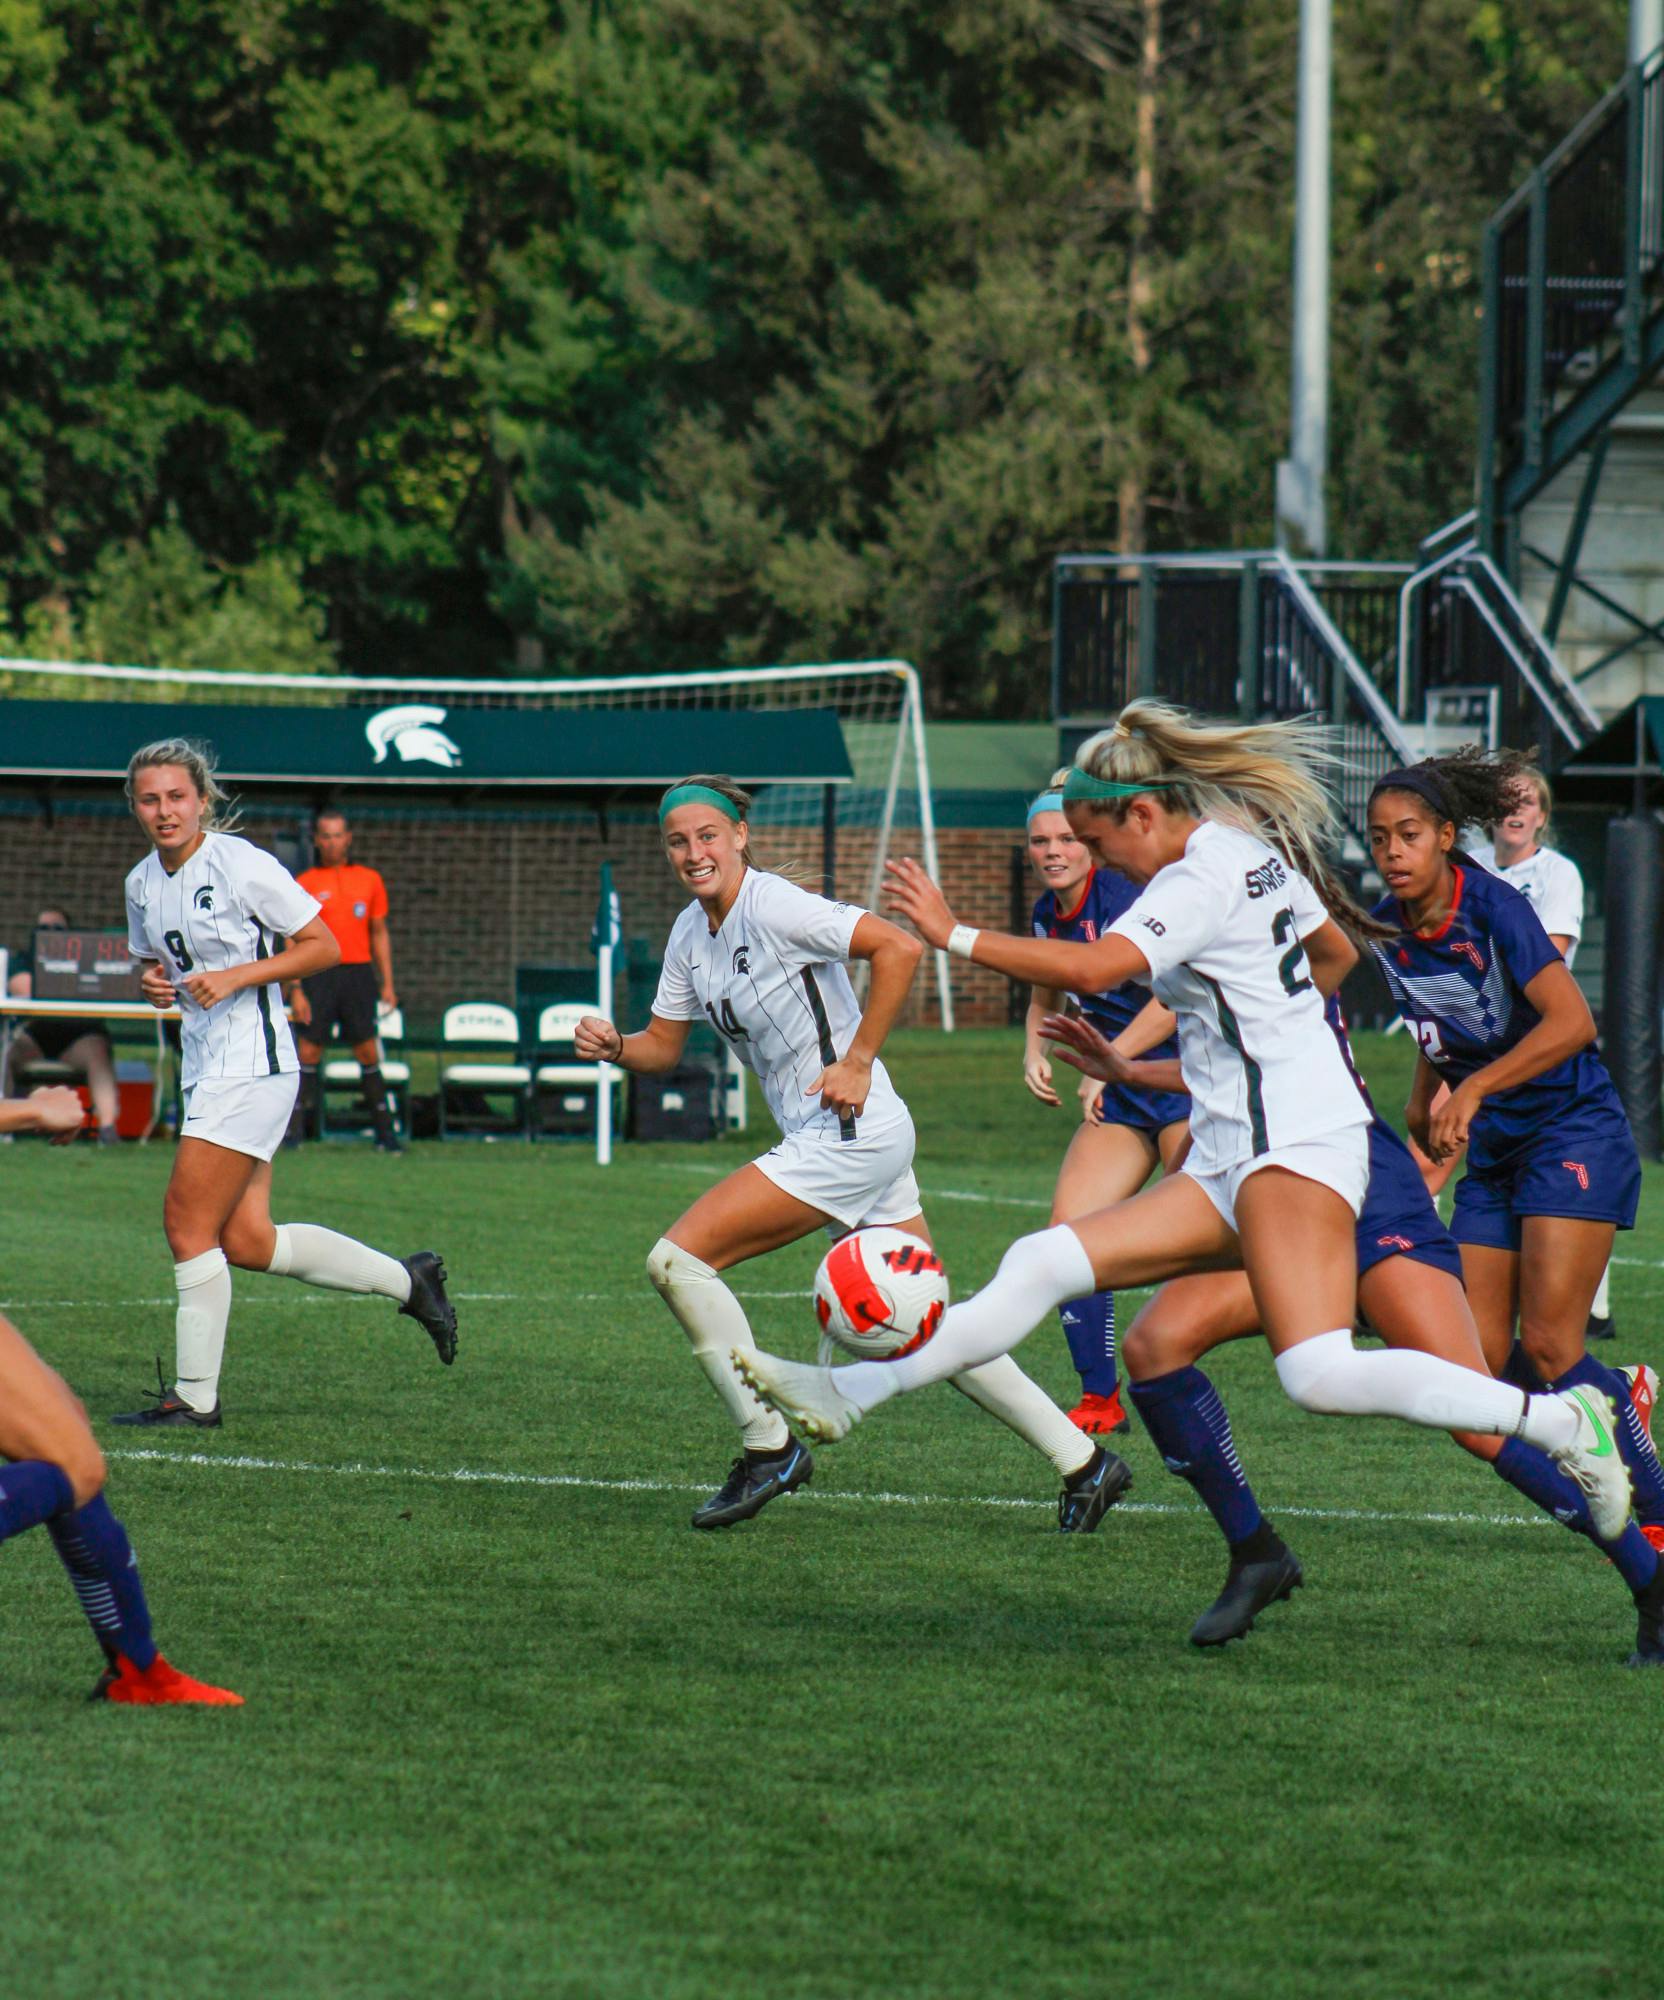 <p>Both teams ran out the clock of the second overtime trying to break the tie from the first half of the game. After 110 minutes, the MSU women&#x27;s soccer team ended their match against Florida Atlantic University 1-1 on August 30, 2021.</p>